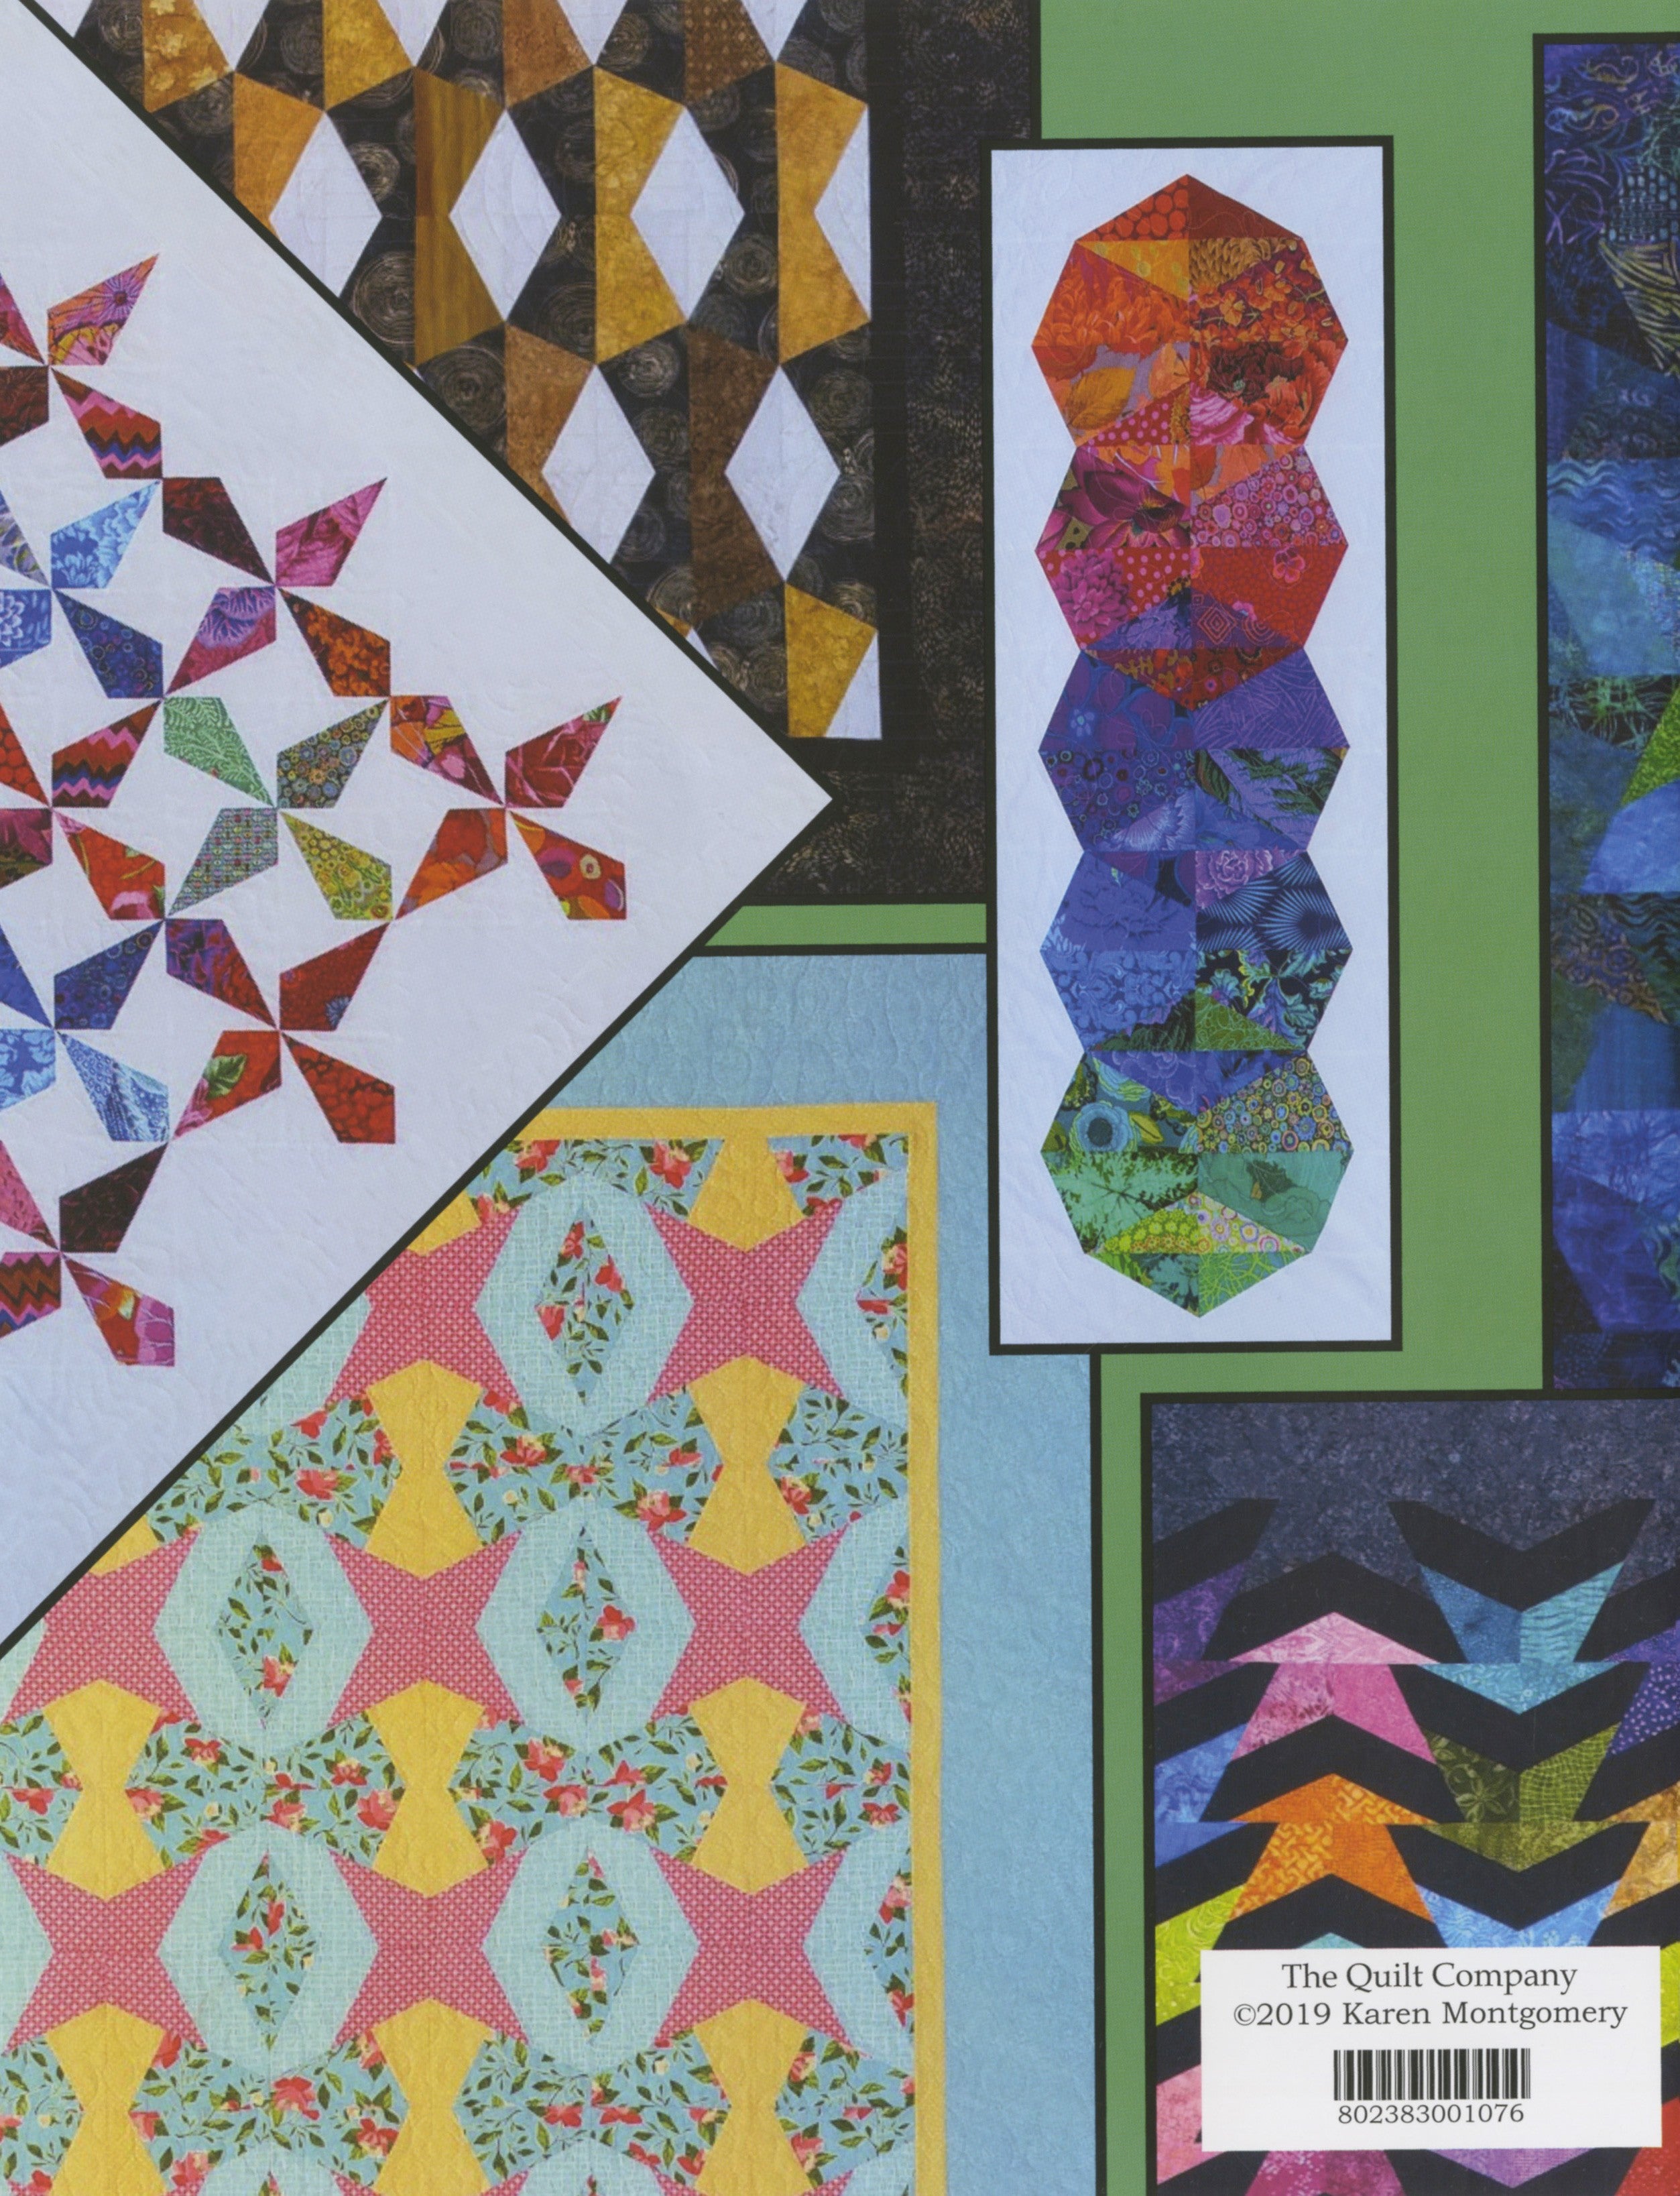 Crazier Eights Playbook Quilt Pattern Book by Karen Montgomery of The Quilt Company